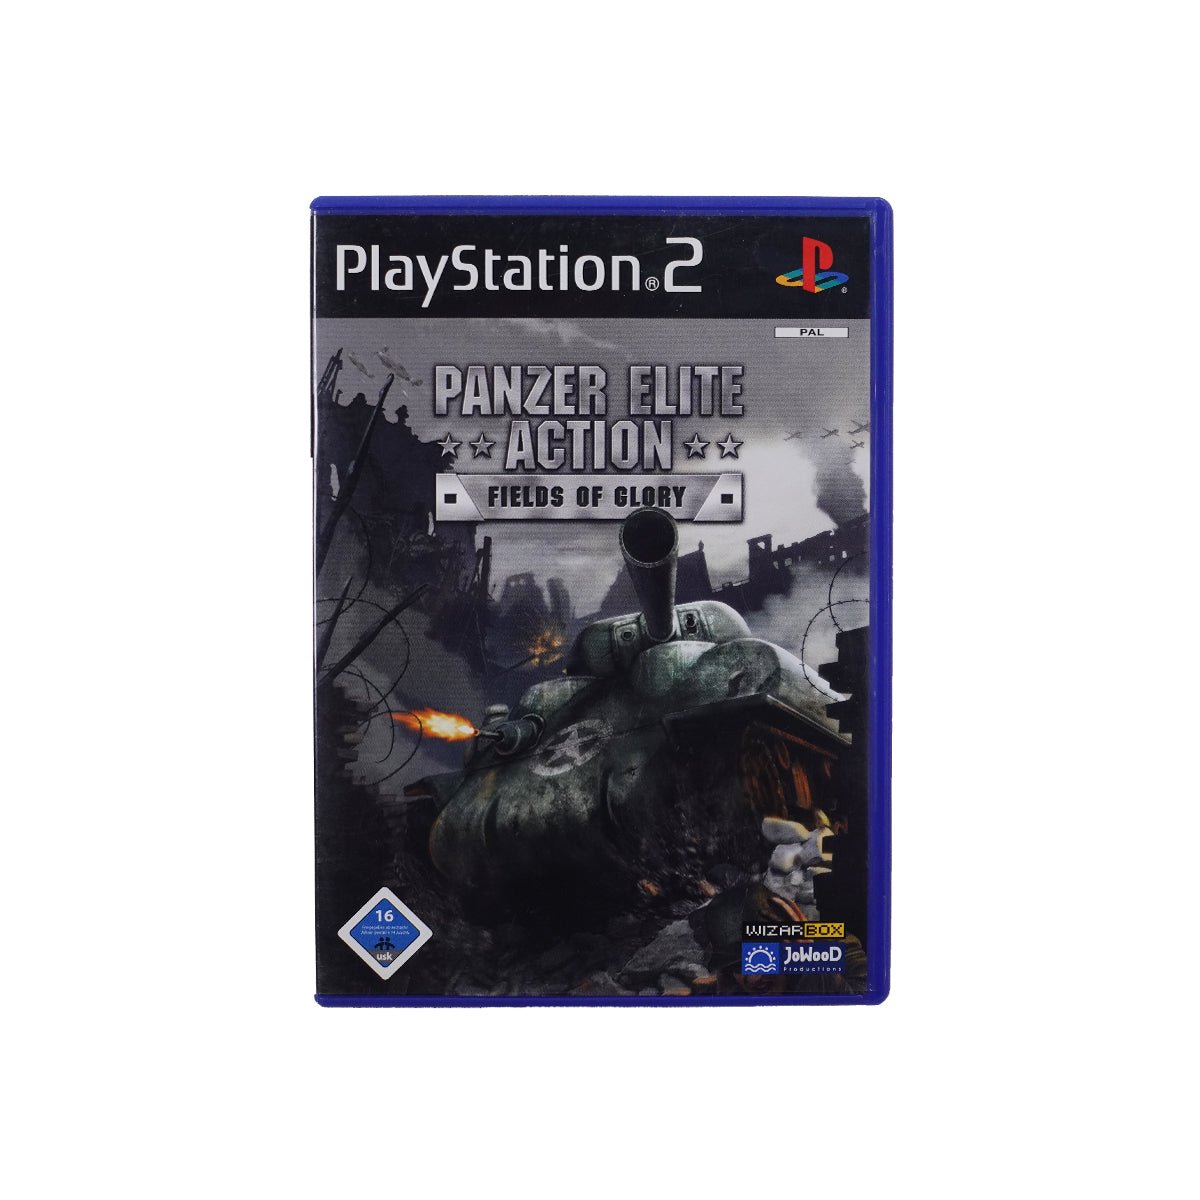 (Pre-Owned) Panzer Elite Action - PlayStation 2 - ريترو - Store 974 | ستور ٩٧٤